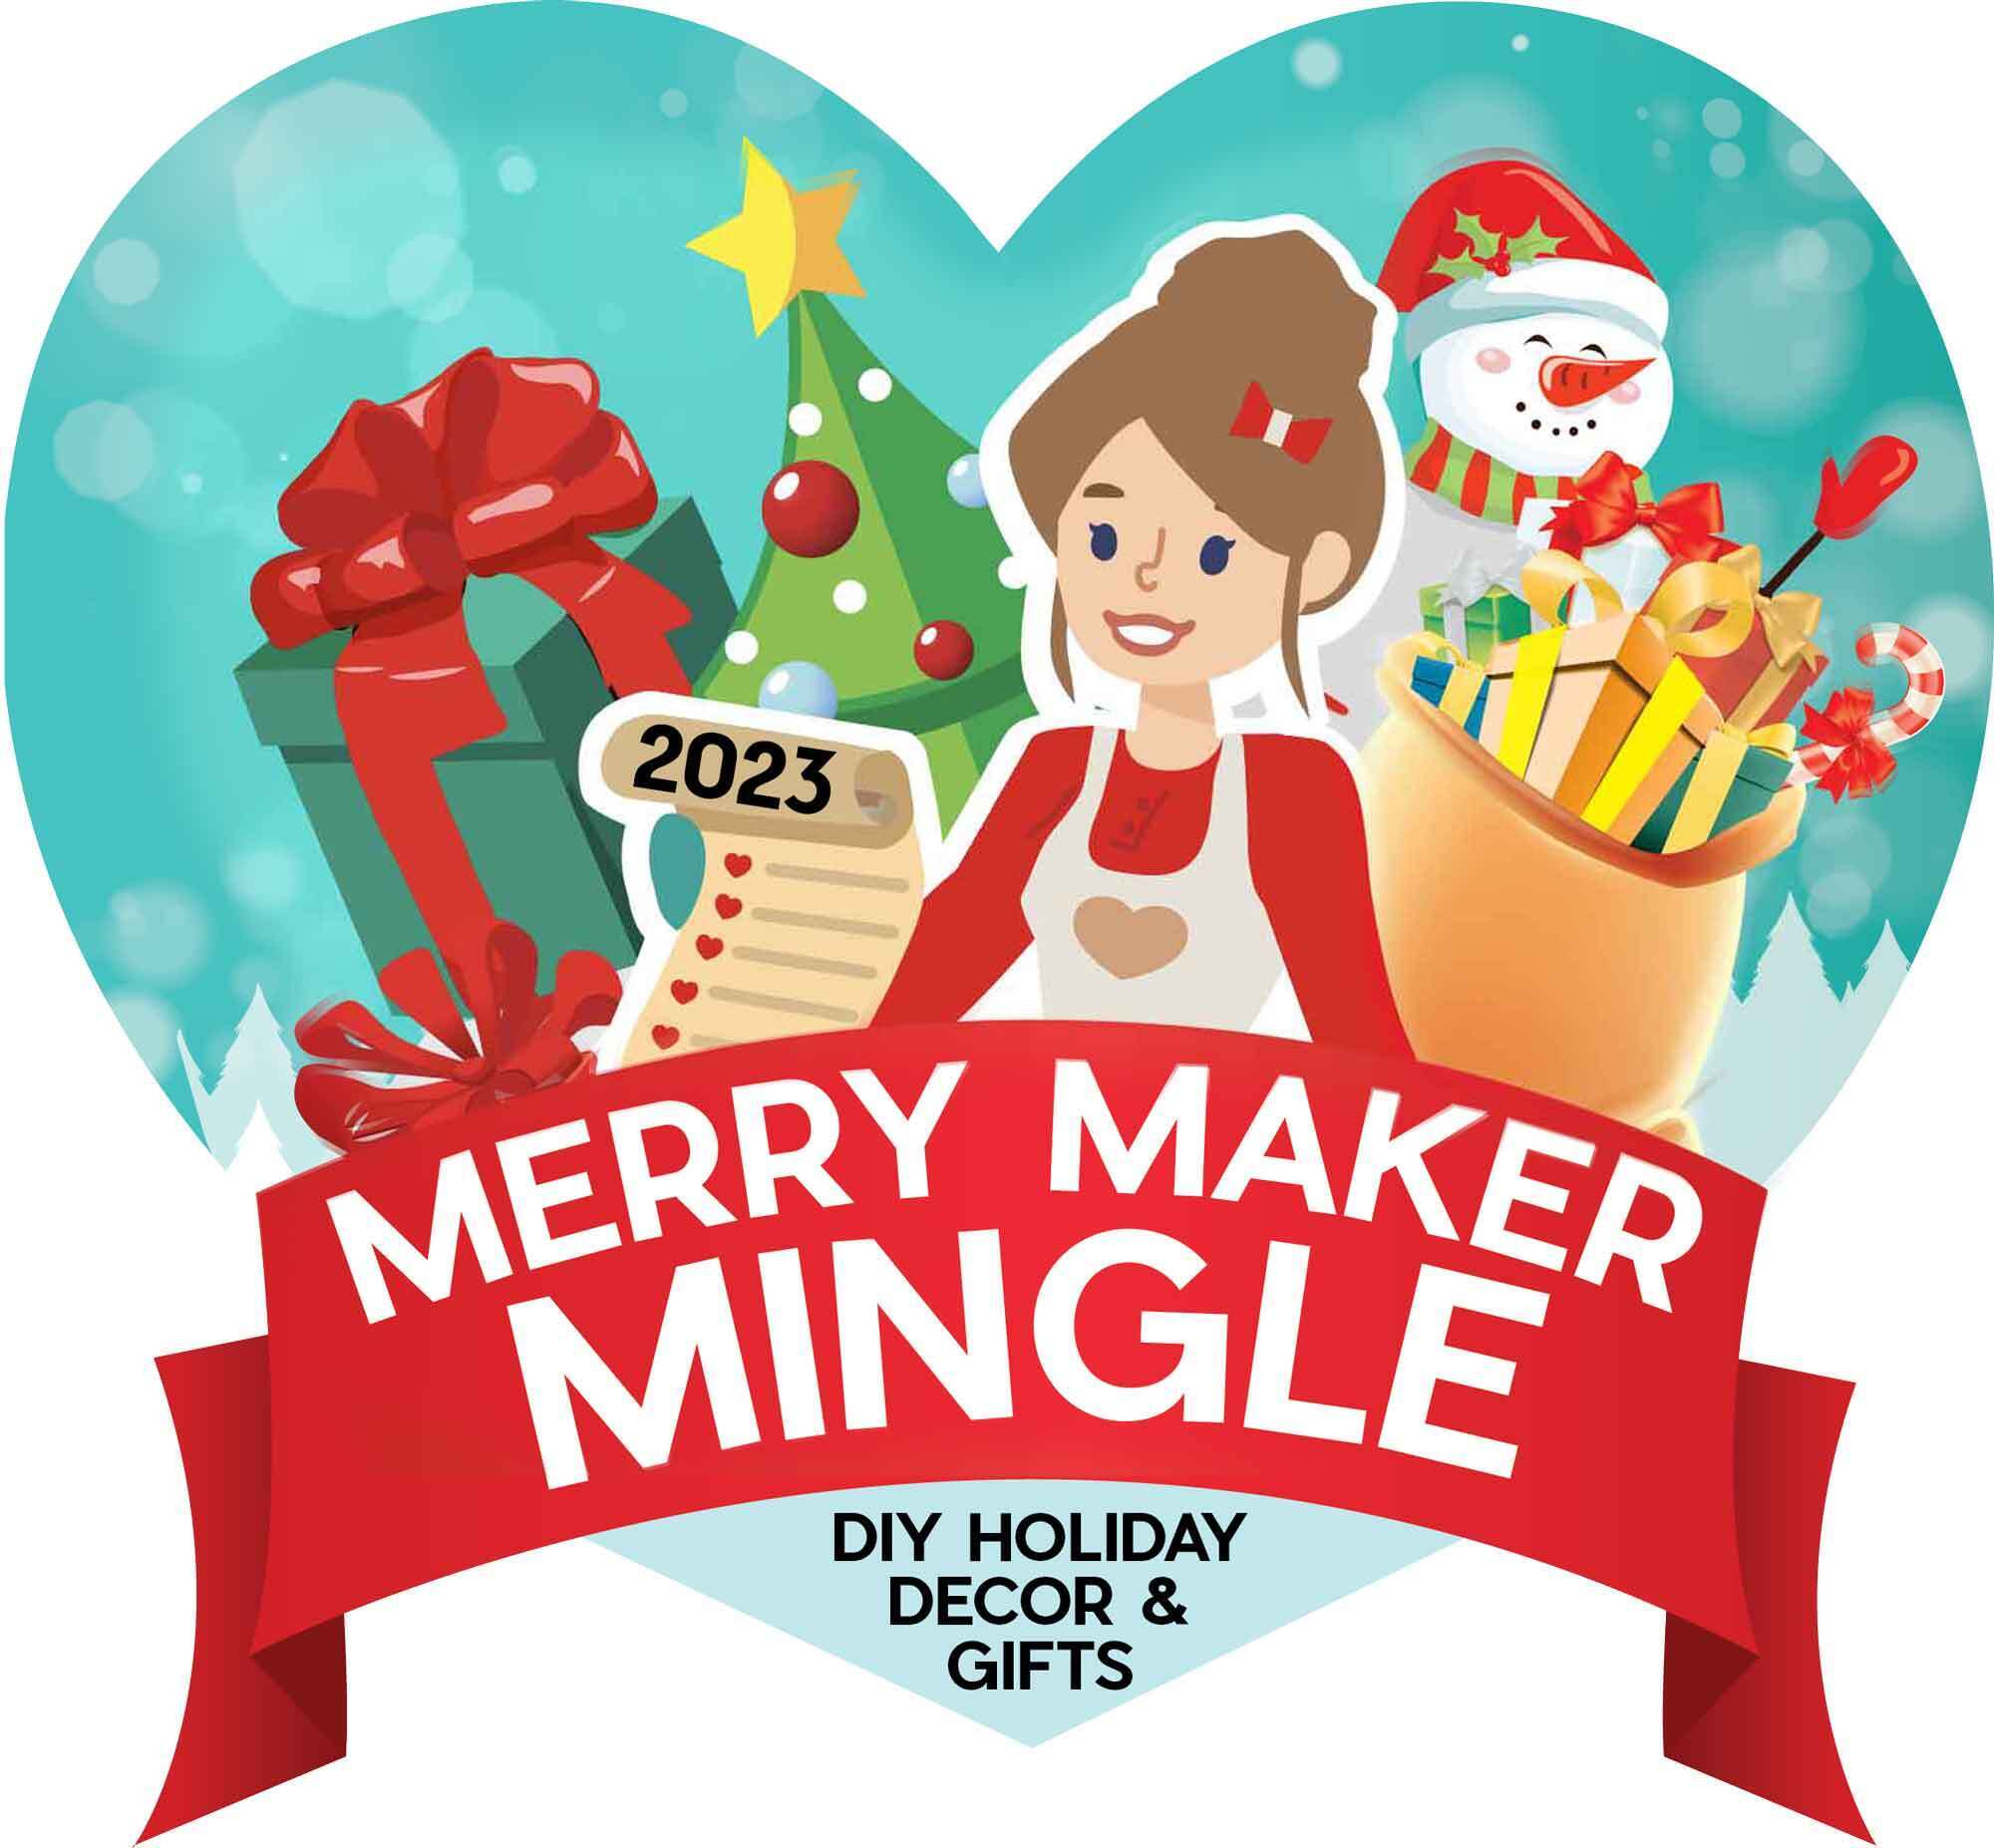 Merry Maker Mingle 2023: Our Annual Countdown to Christmas